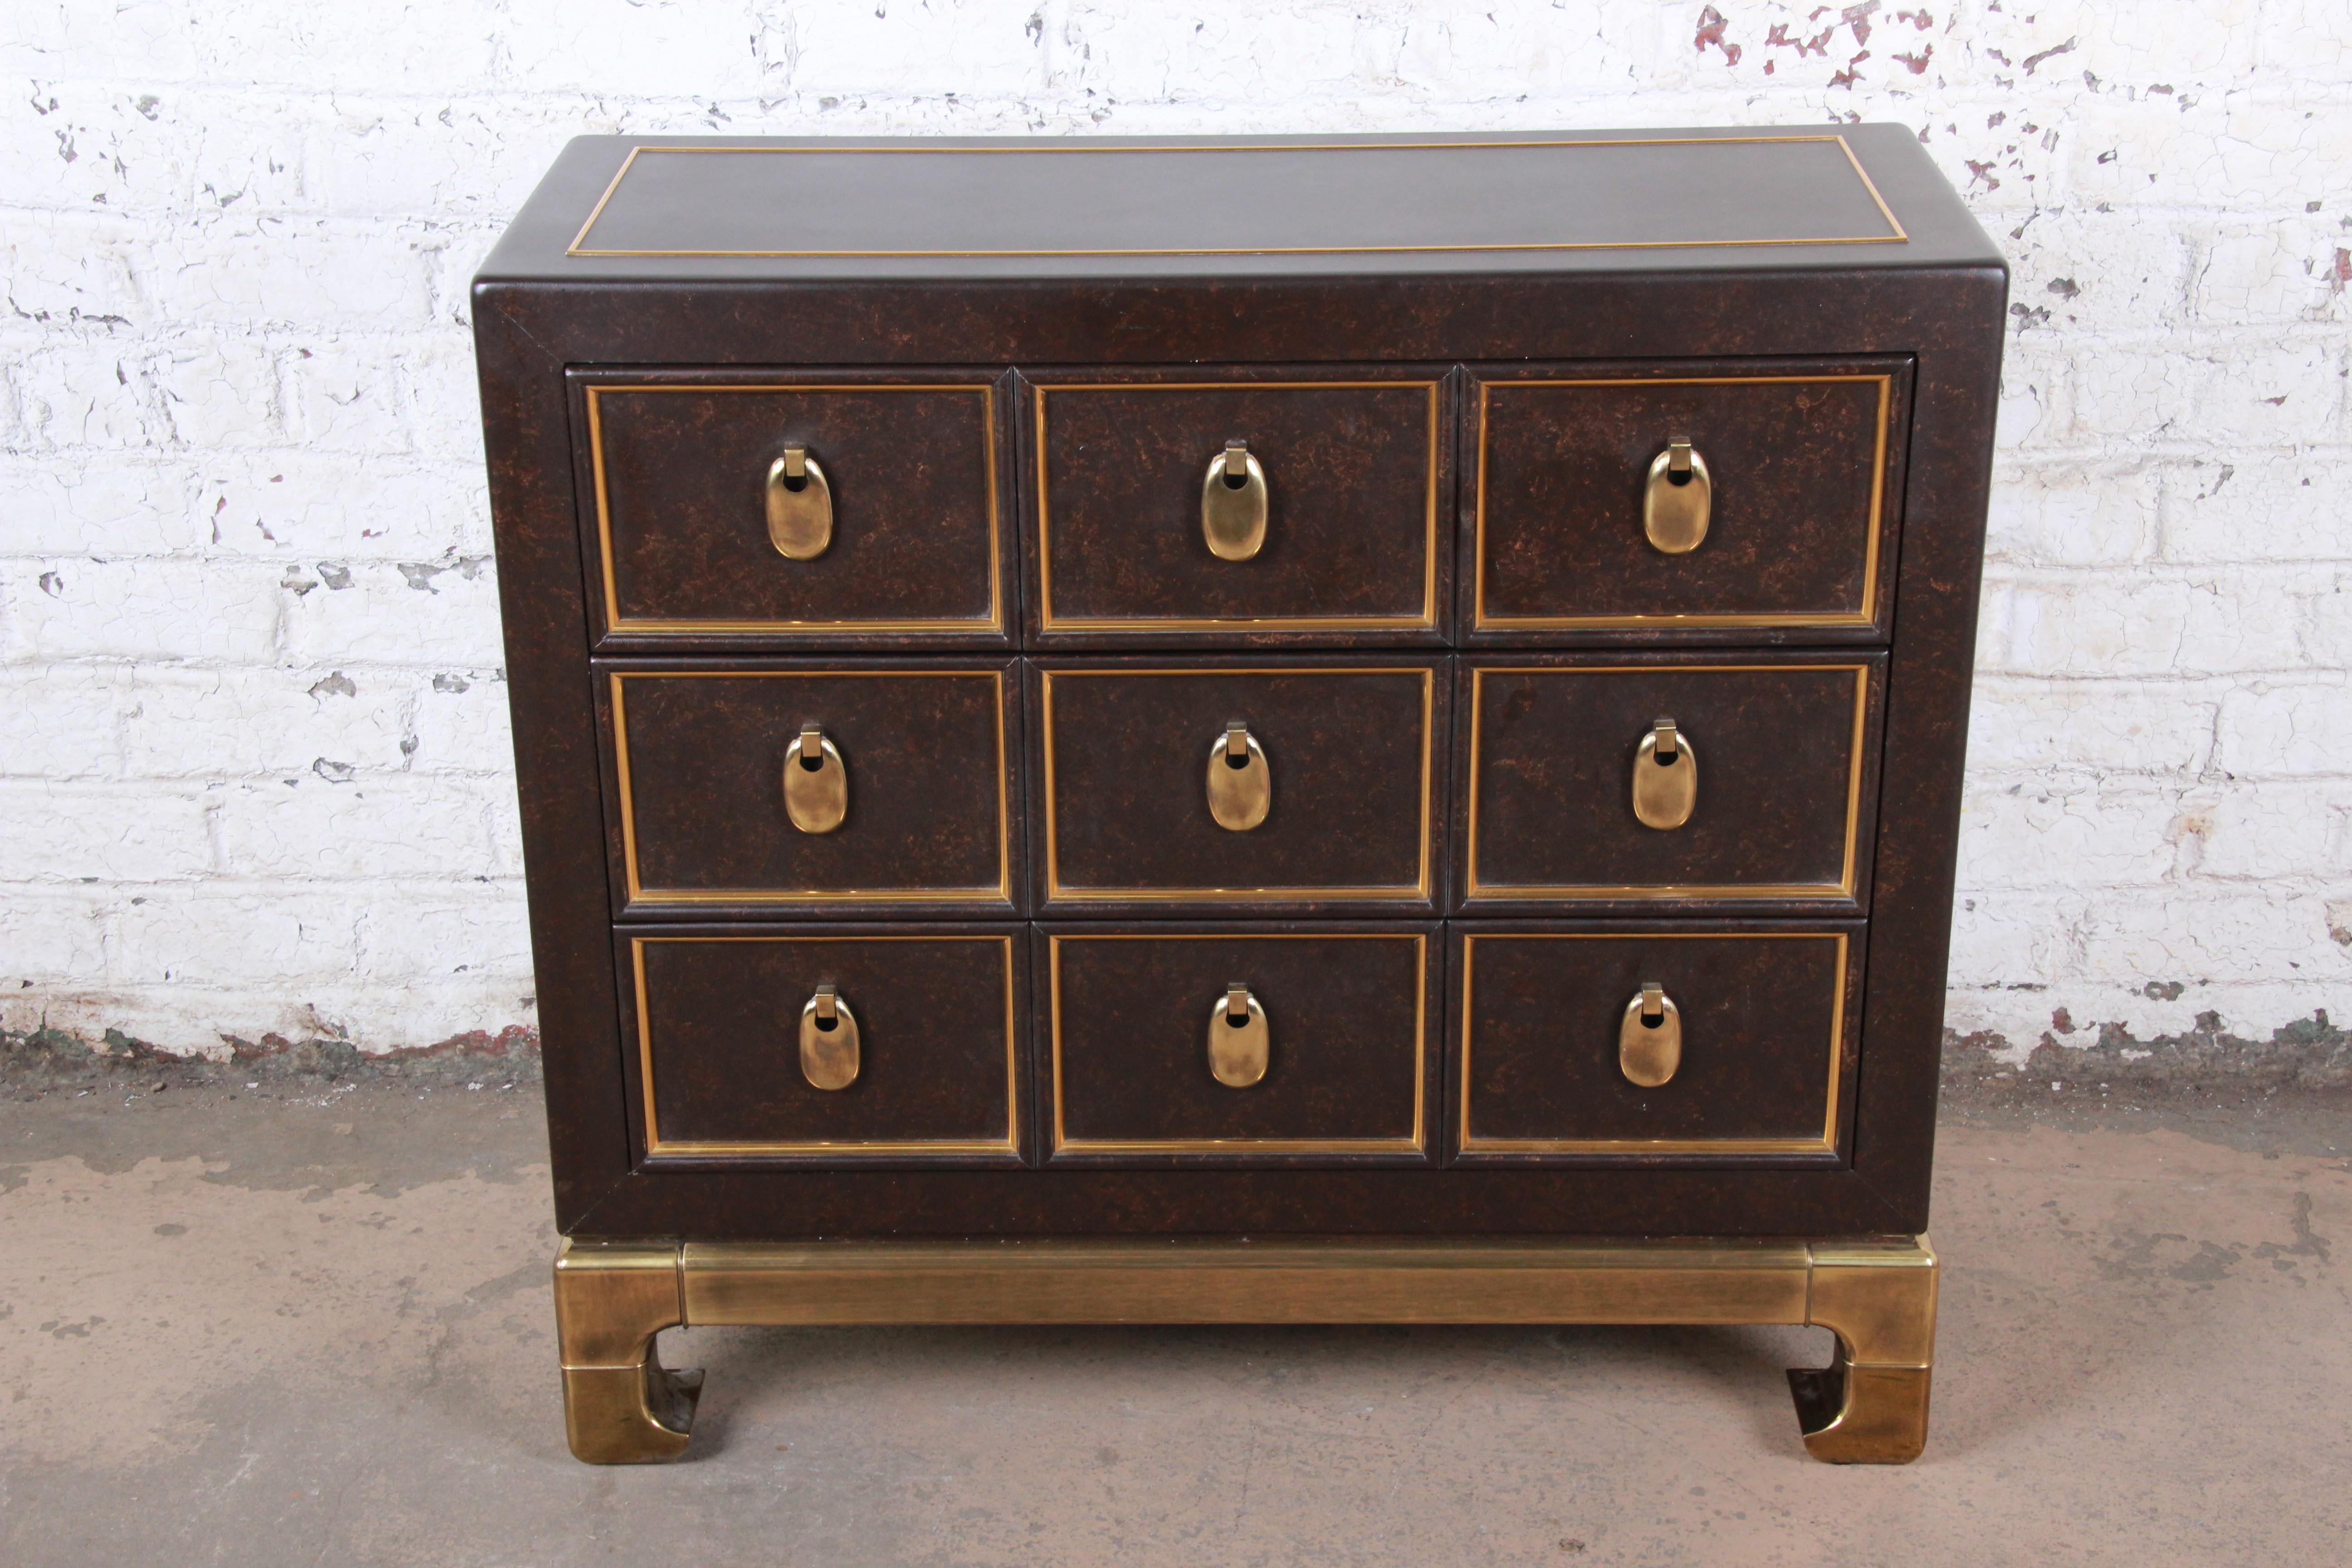 A rare and exceptional Mid-Century Modern Hollywood Regency chinoiserie three-drawer bachelor chest or commode

By Mastercraft Furniture

USA, circa 1970s

Asian-inspired brass legs, with brass trim and hardware and faux tortoiseshell